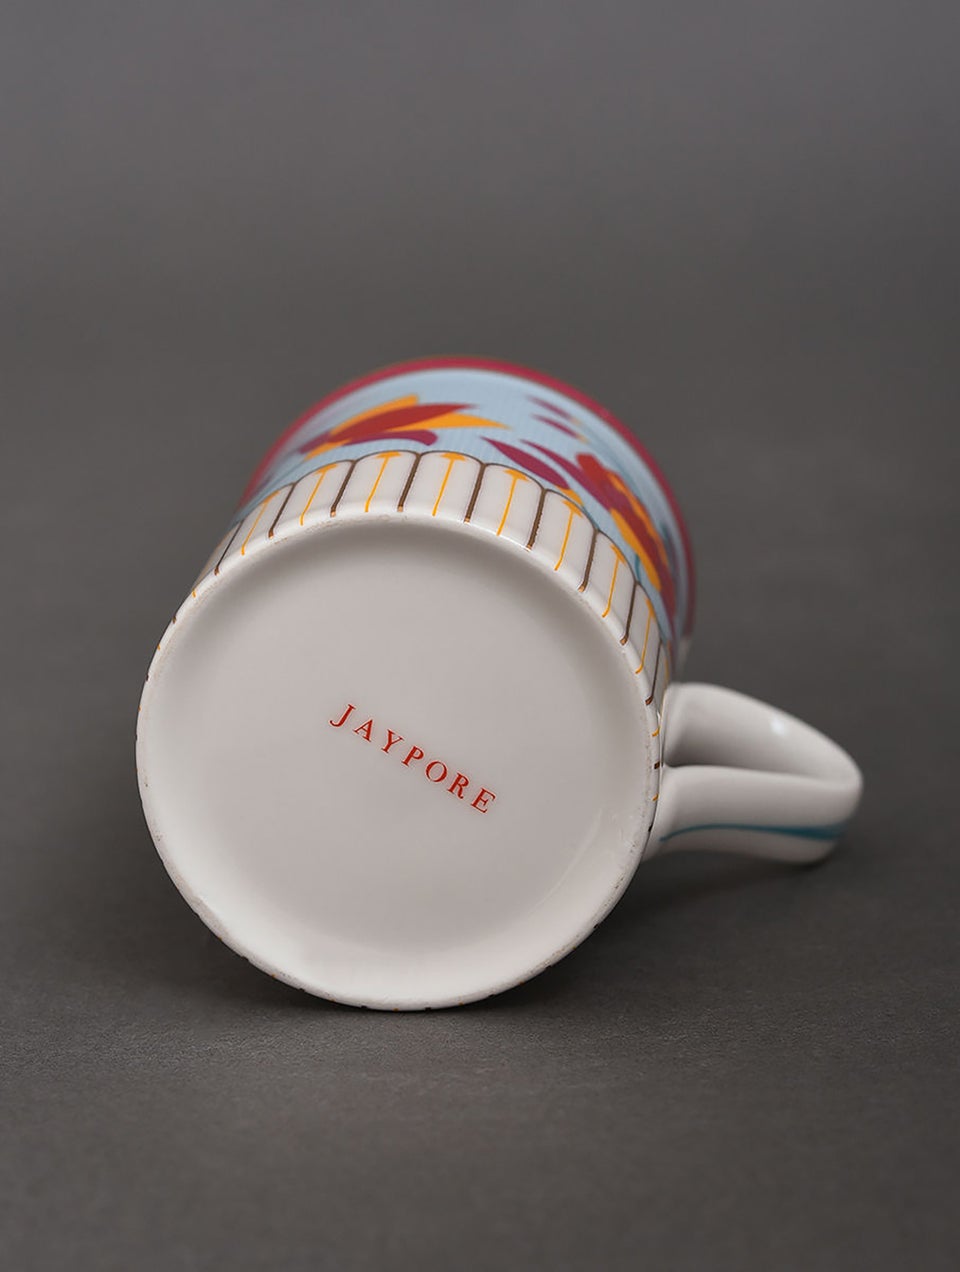 Handcrafted Porcelain Paithan Coffee Mug With 24 Karat Gold Work In A Gift Box